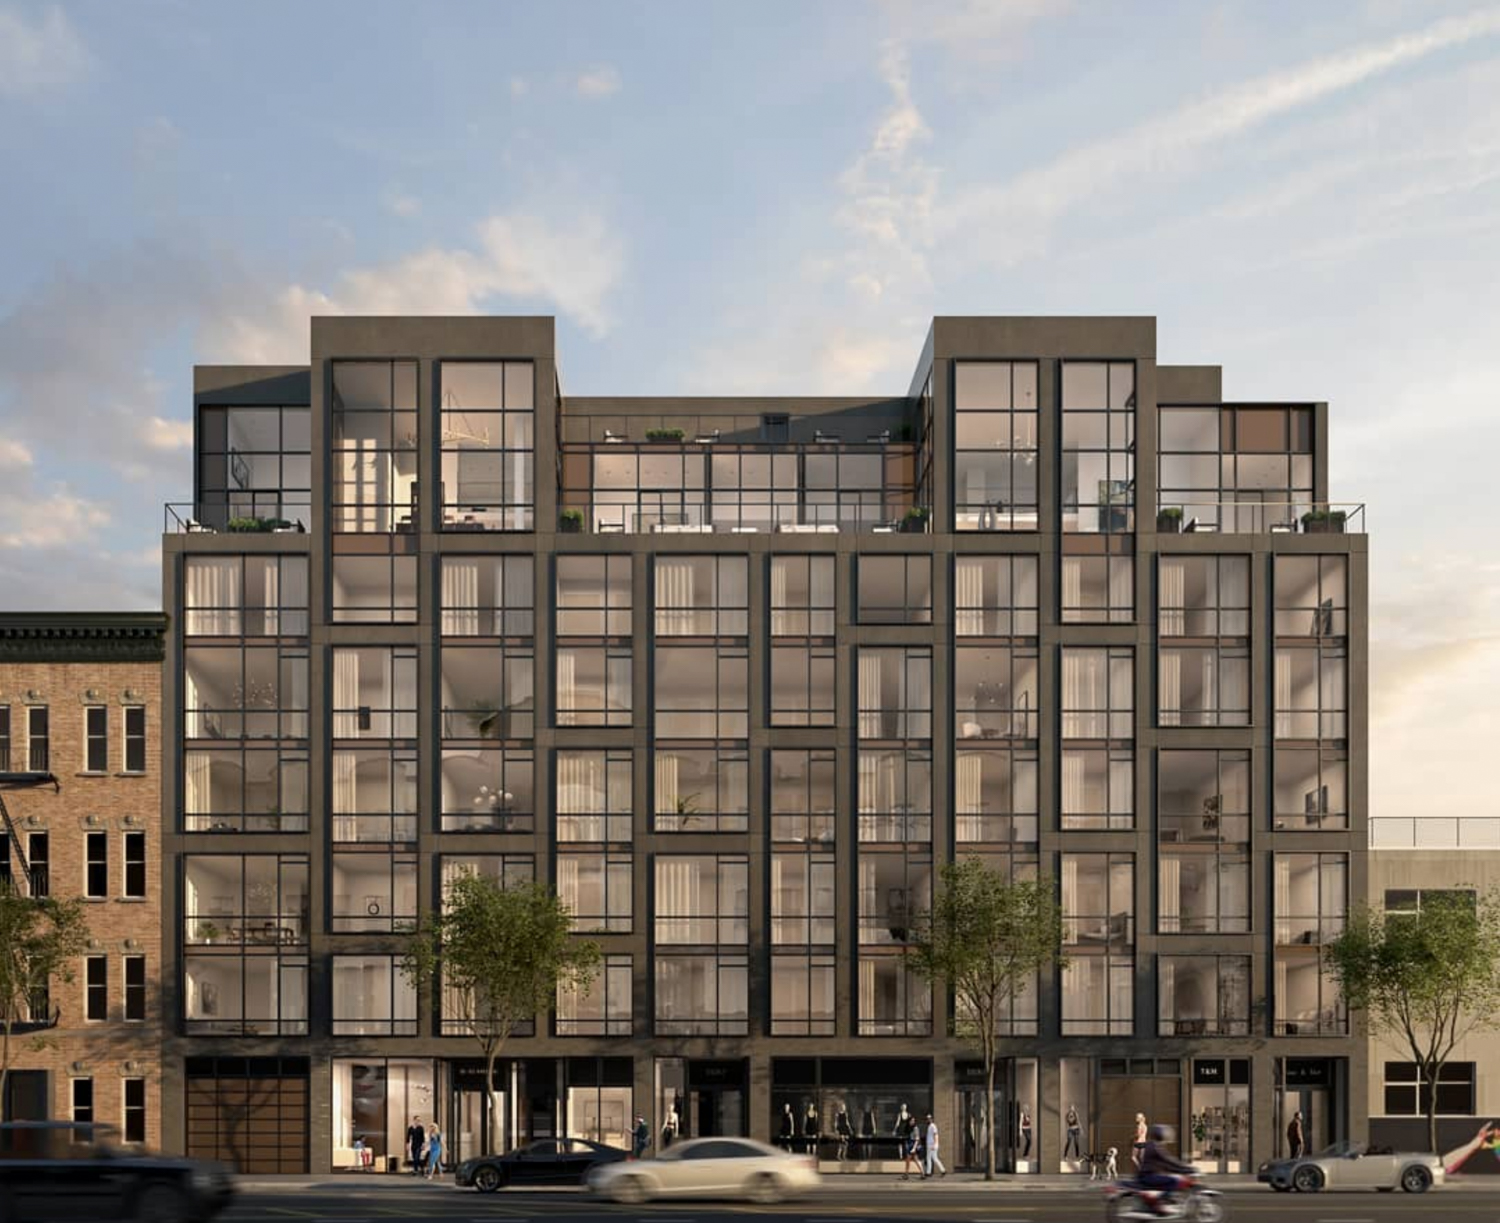 11-12 44th drive, rendering by Carbn NYC